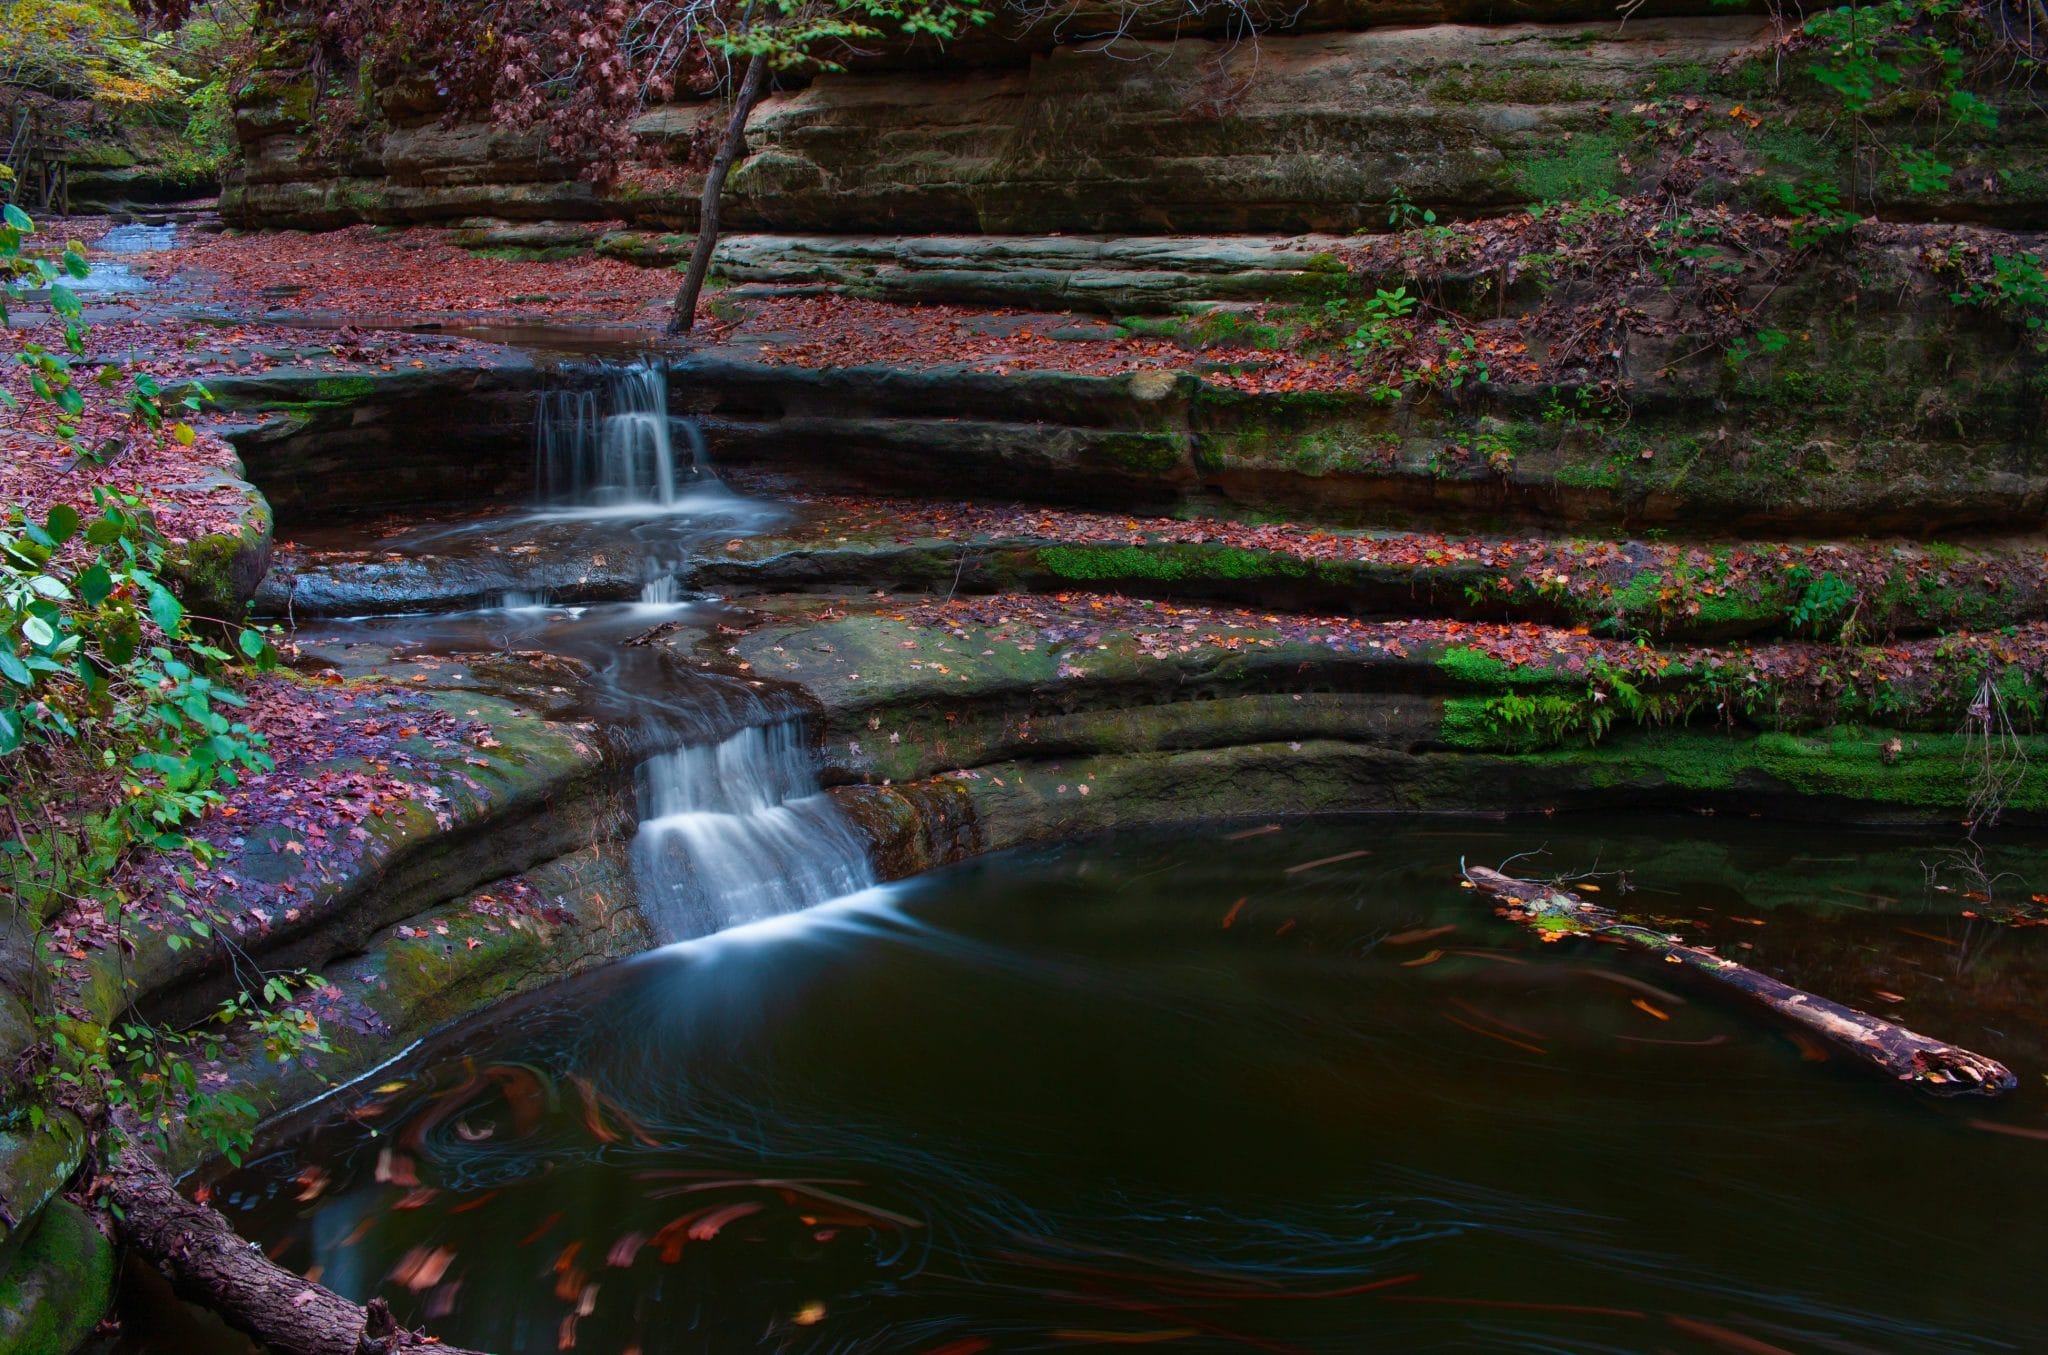 Image of the Giant's Bathtub located in Matthiessen State Park near Chicago